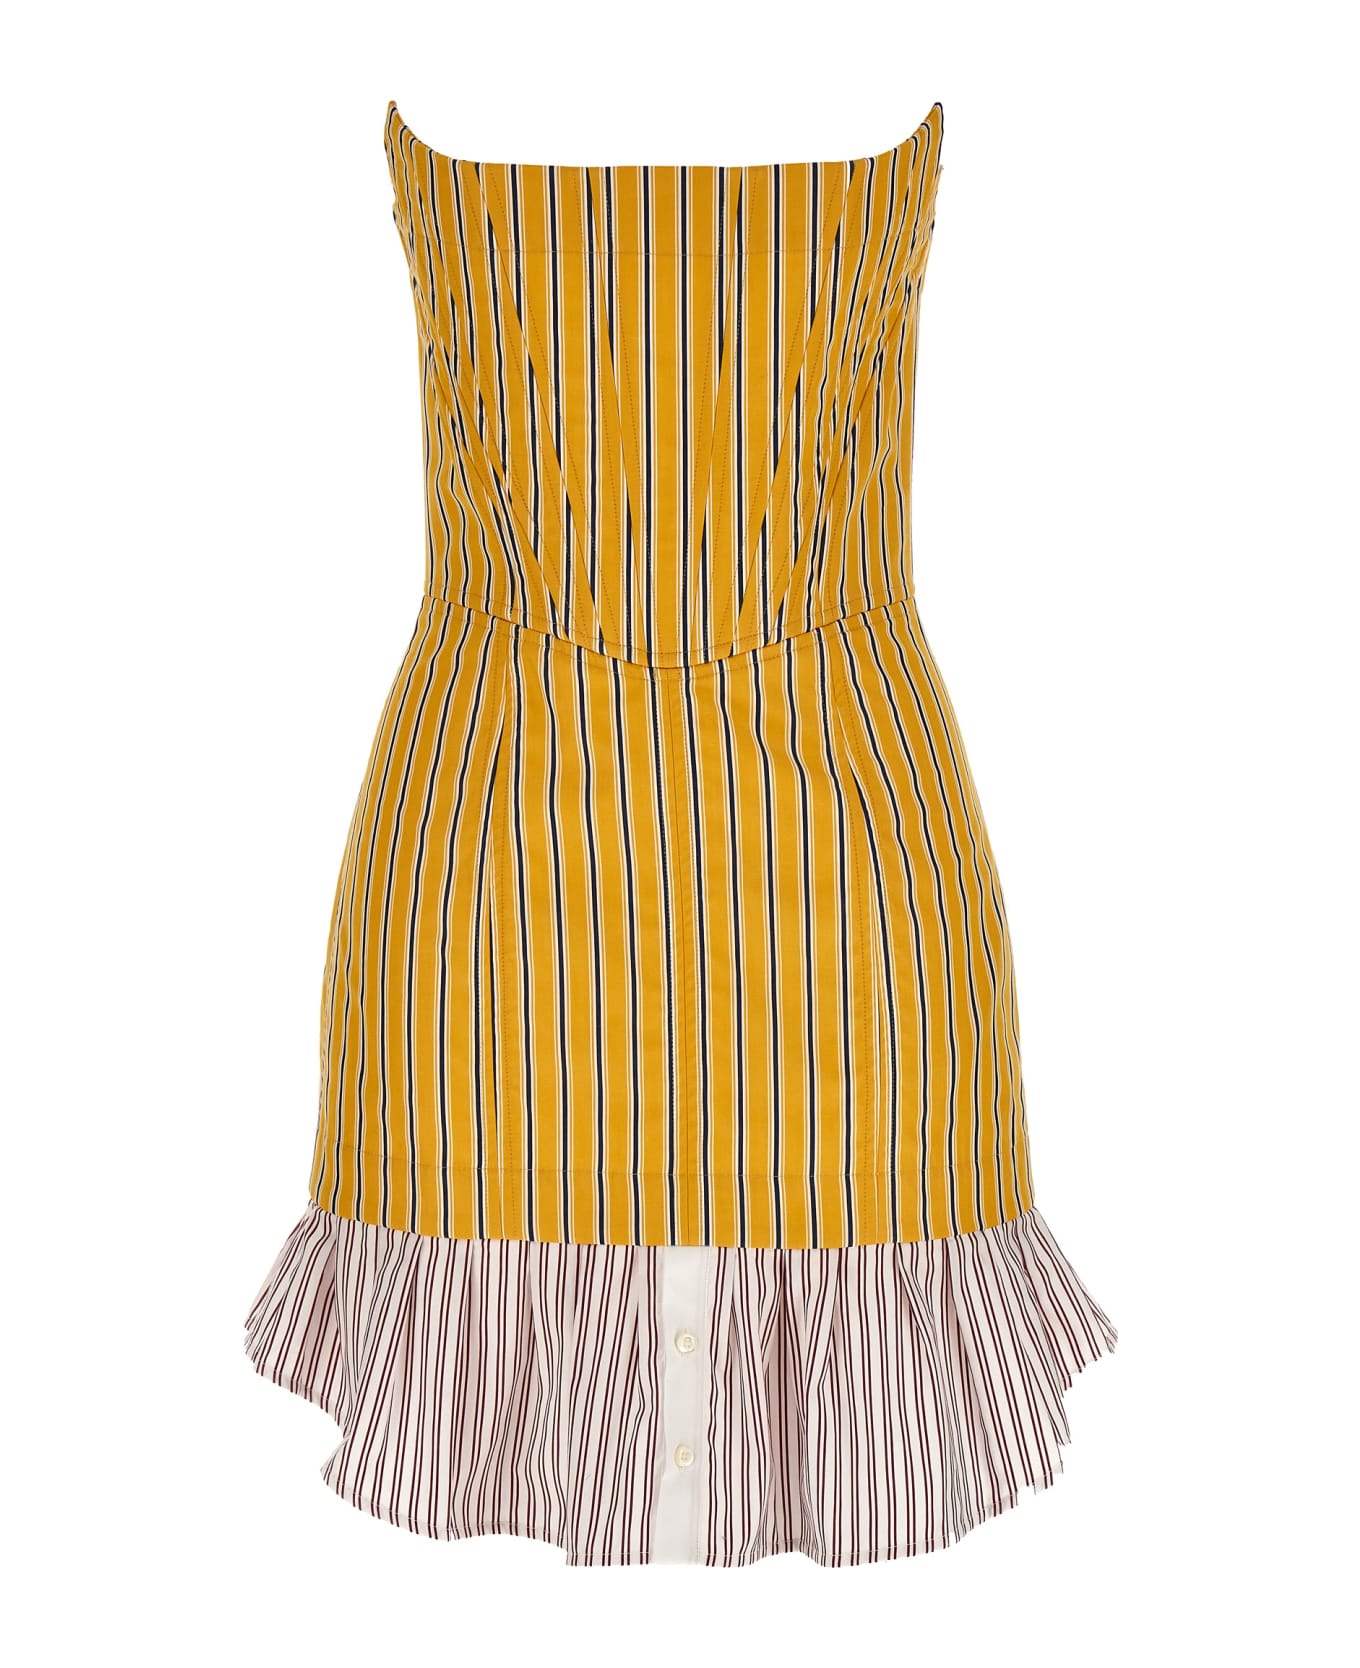 Dsquared2 Striped Corset Dress - YELLOW/RED